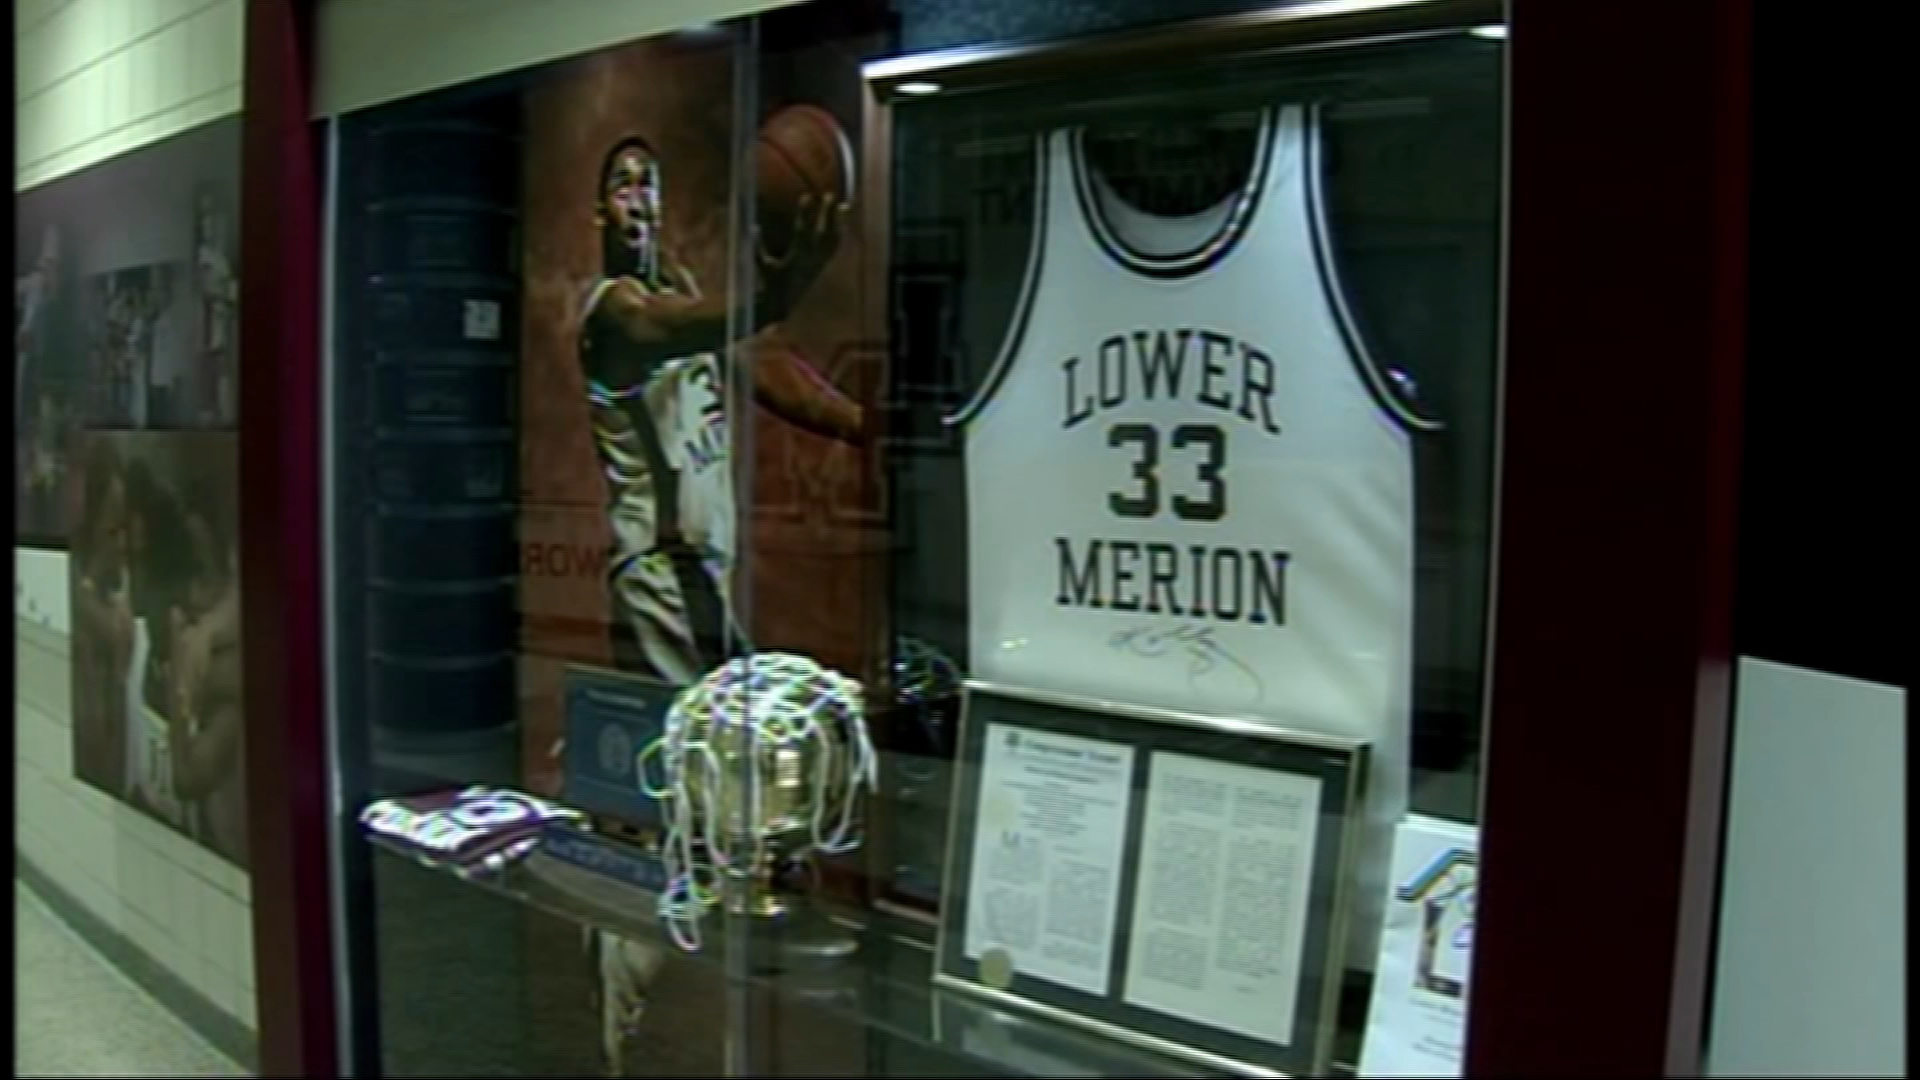 lower merion 24 jersey